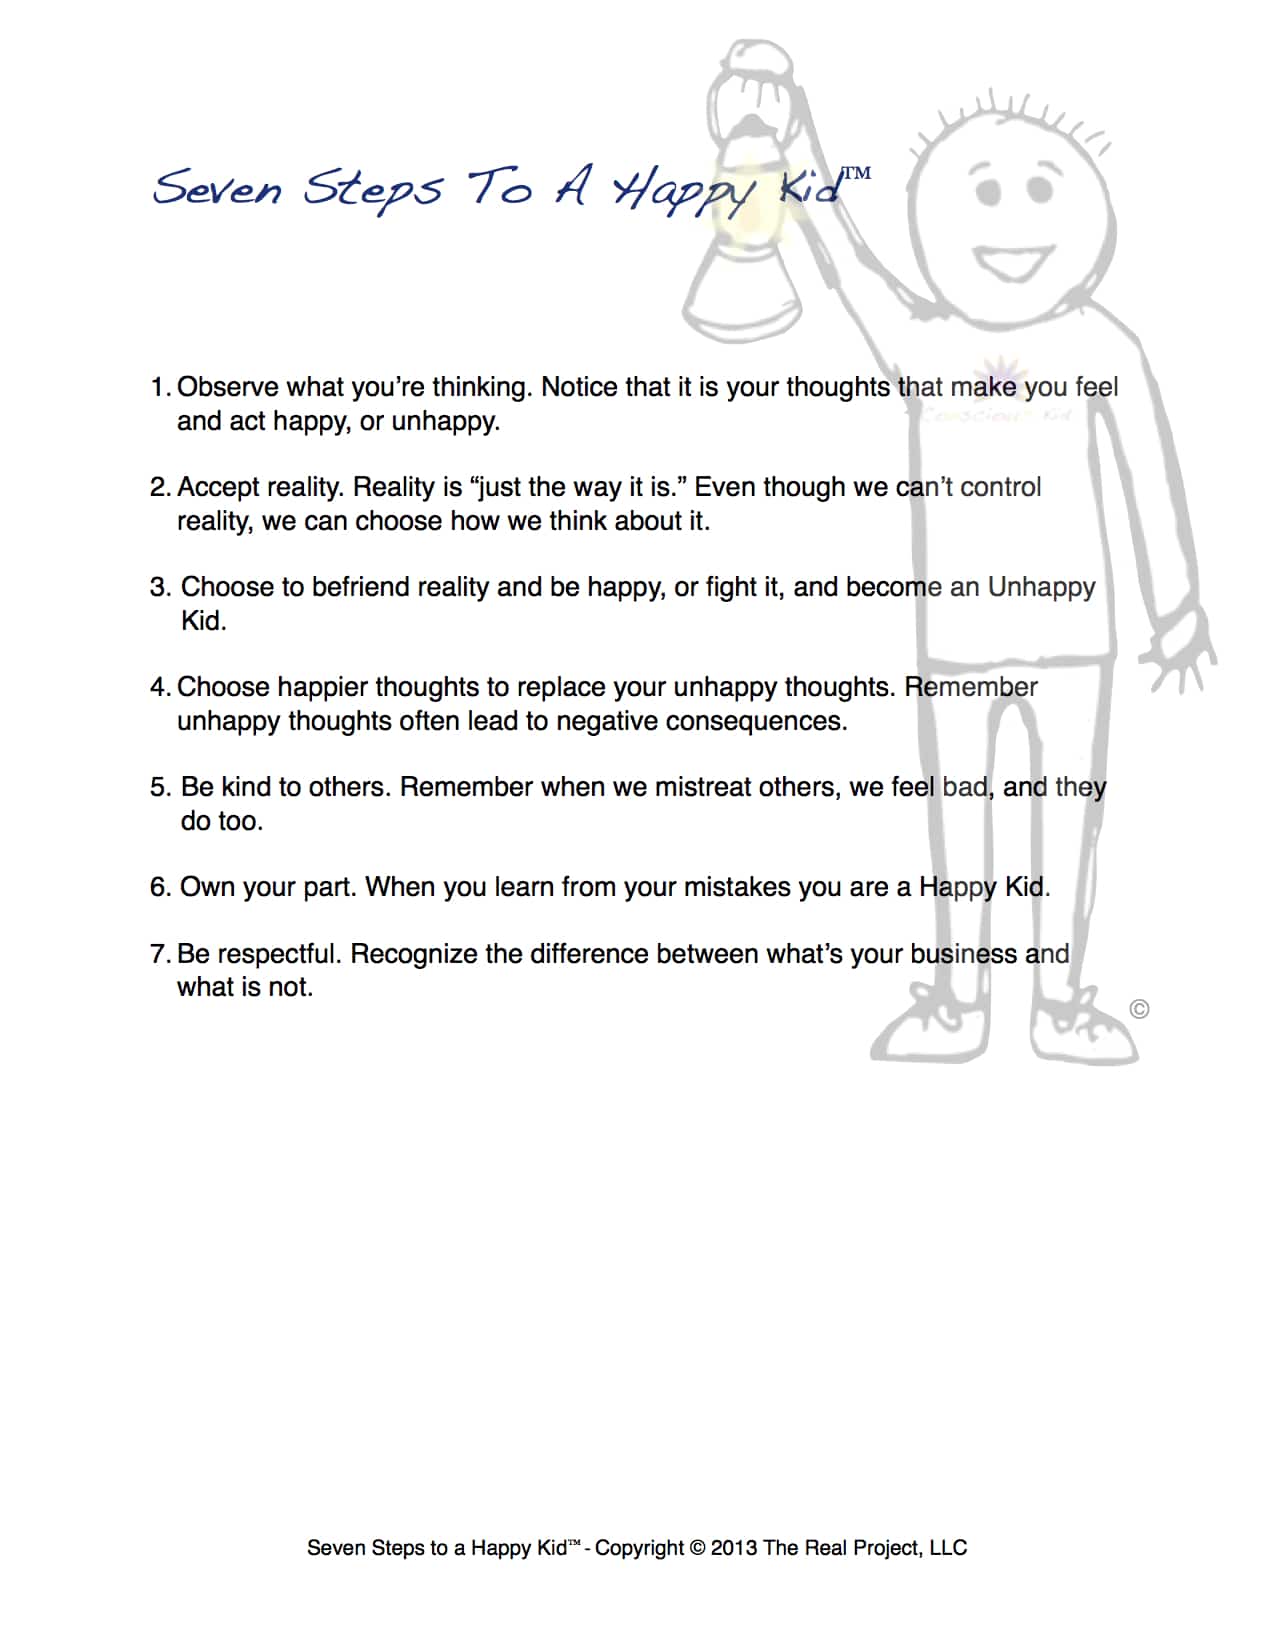 Seven Steps To A Happy Kid